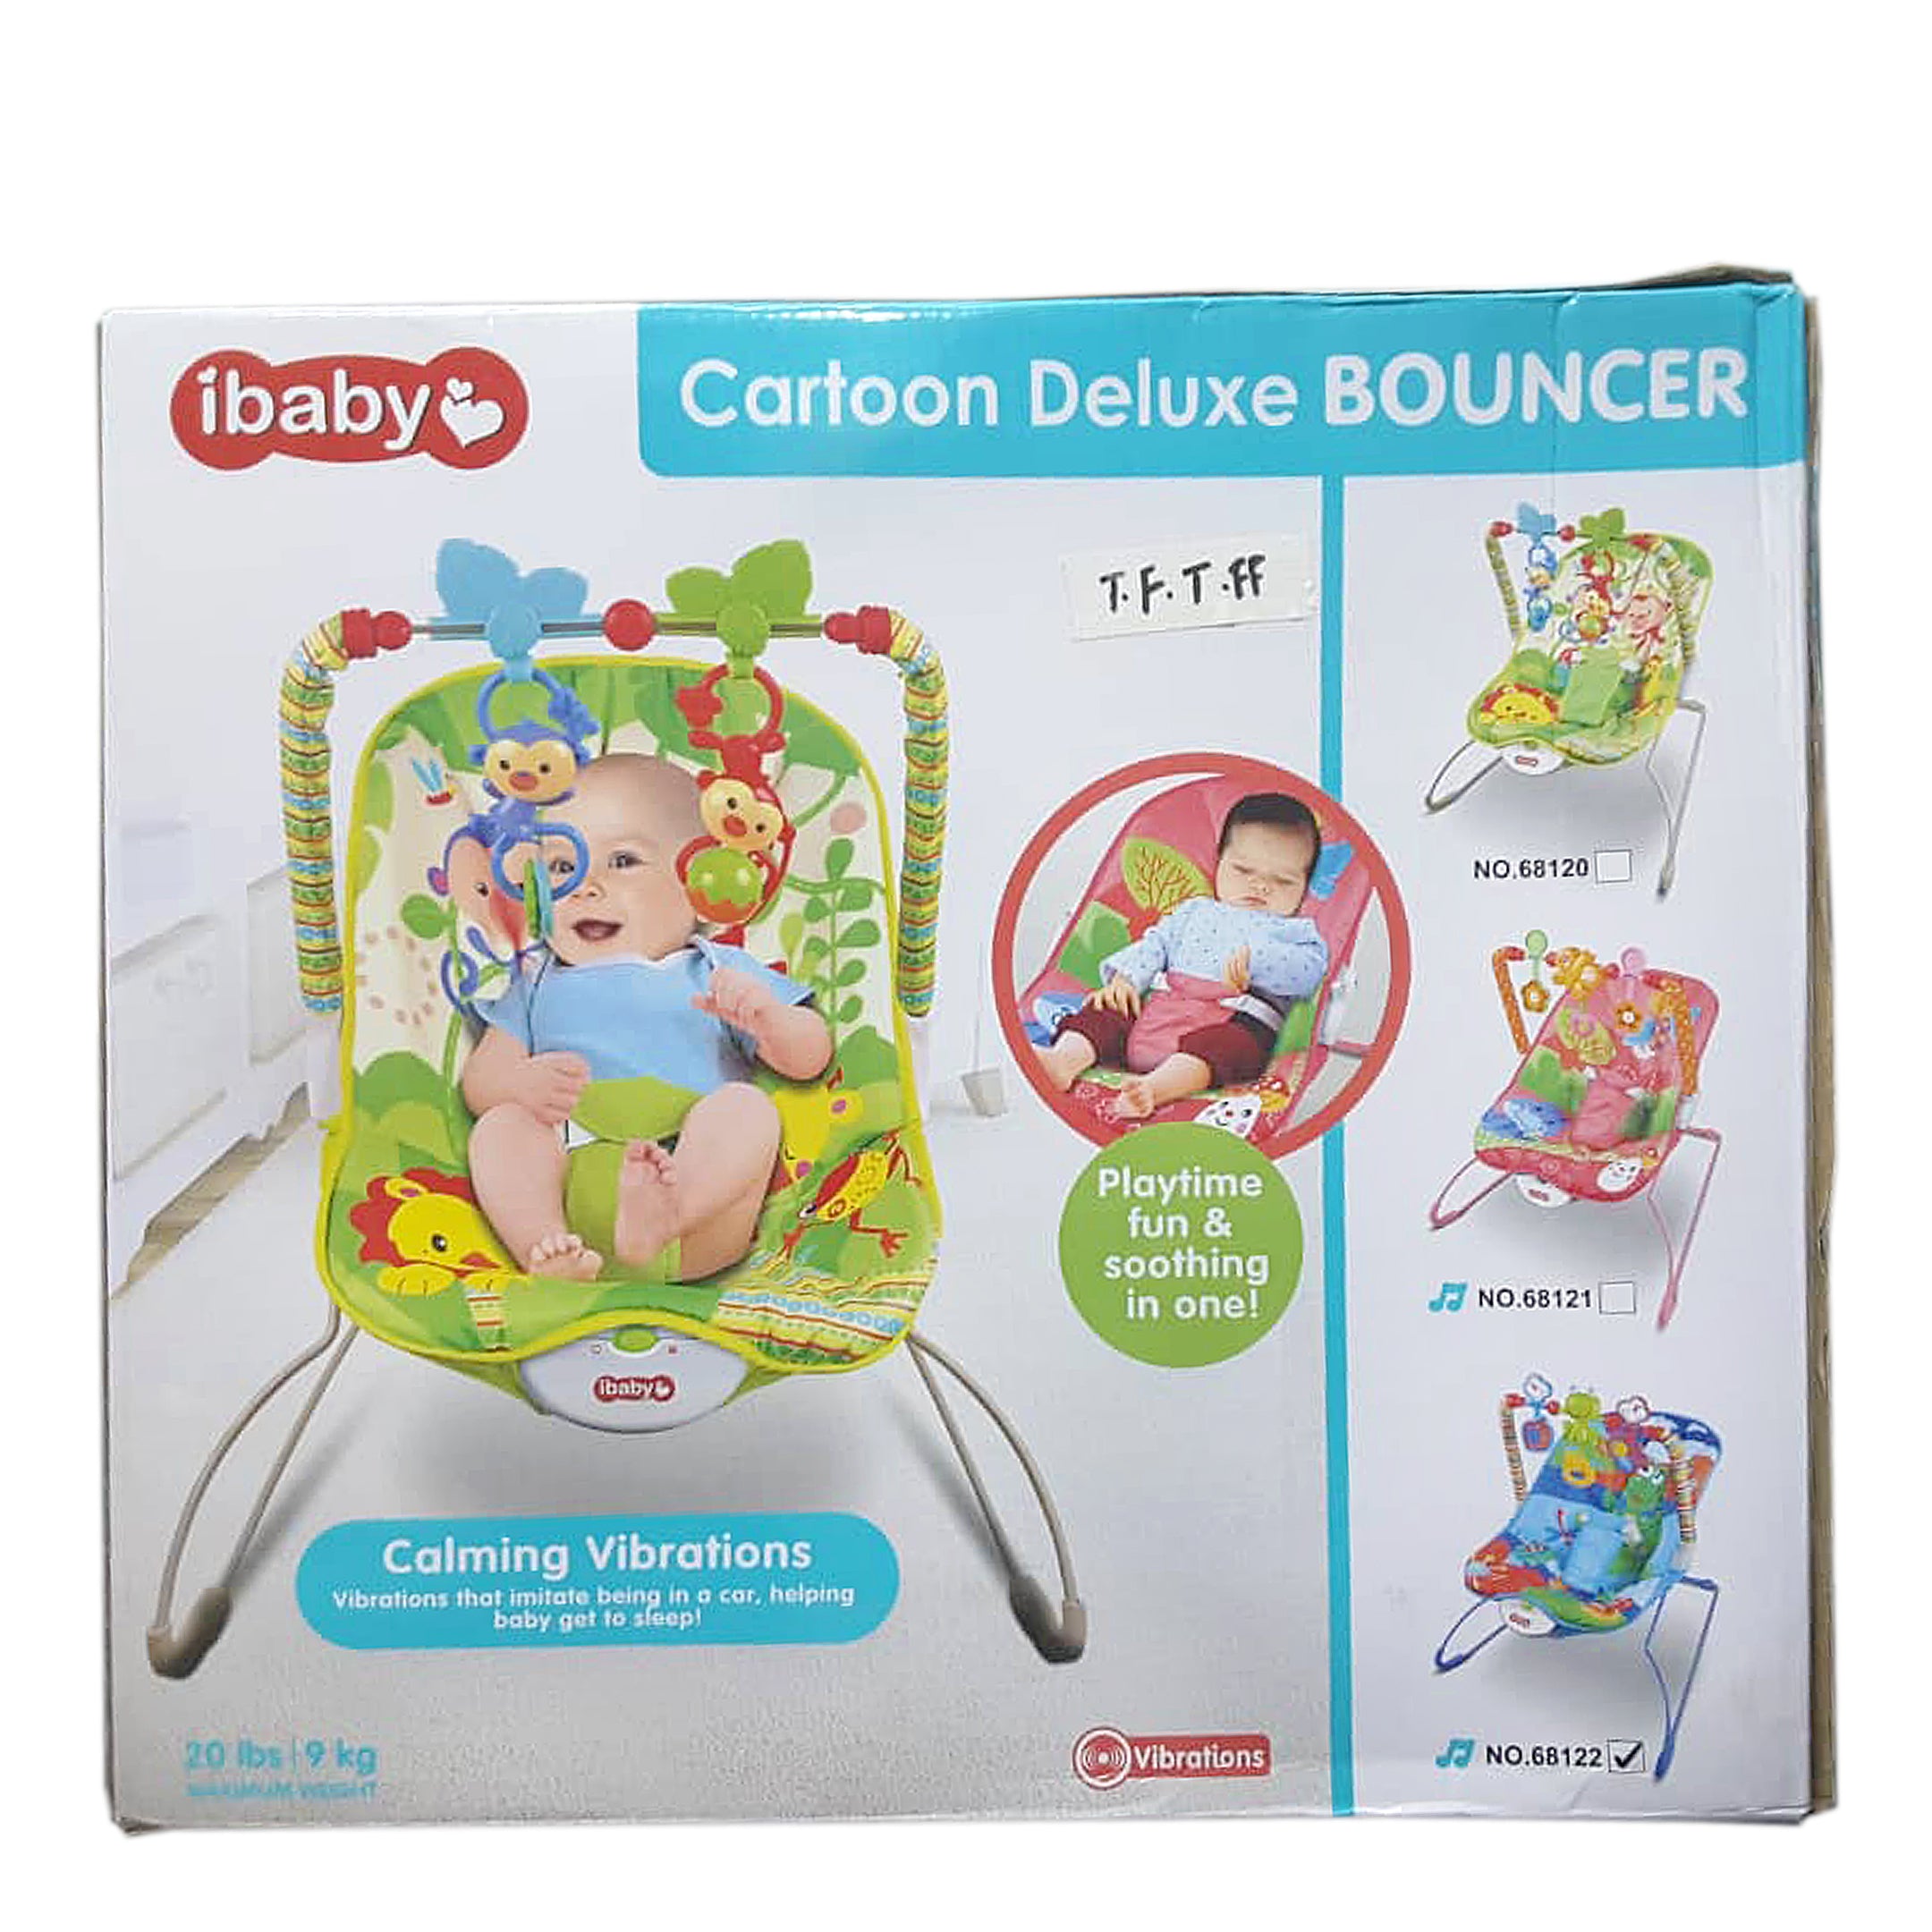 ibaby Cartoon Deluxe Bouncer with Vibrations